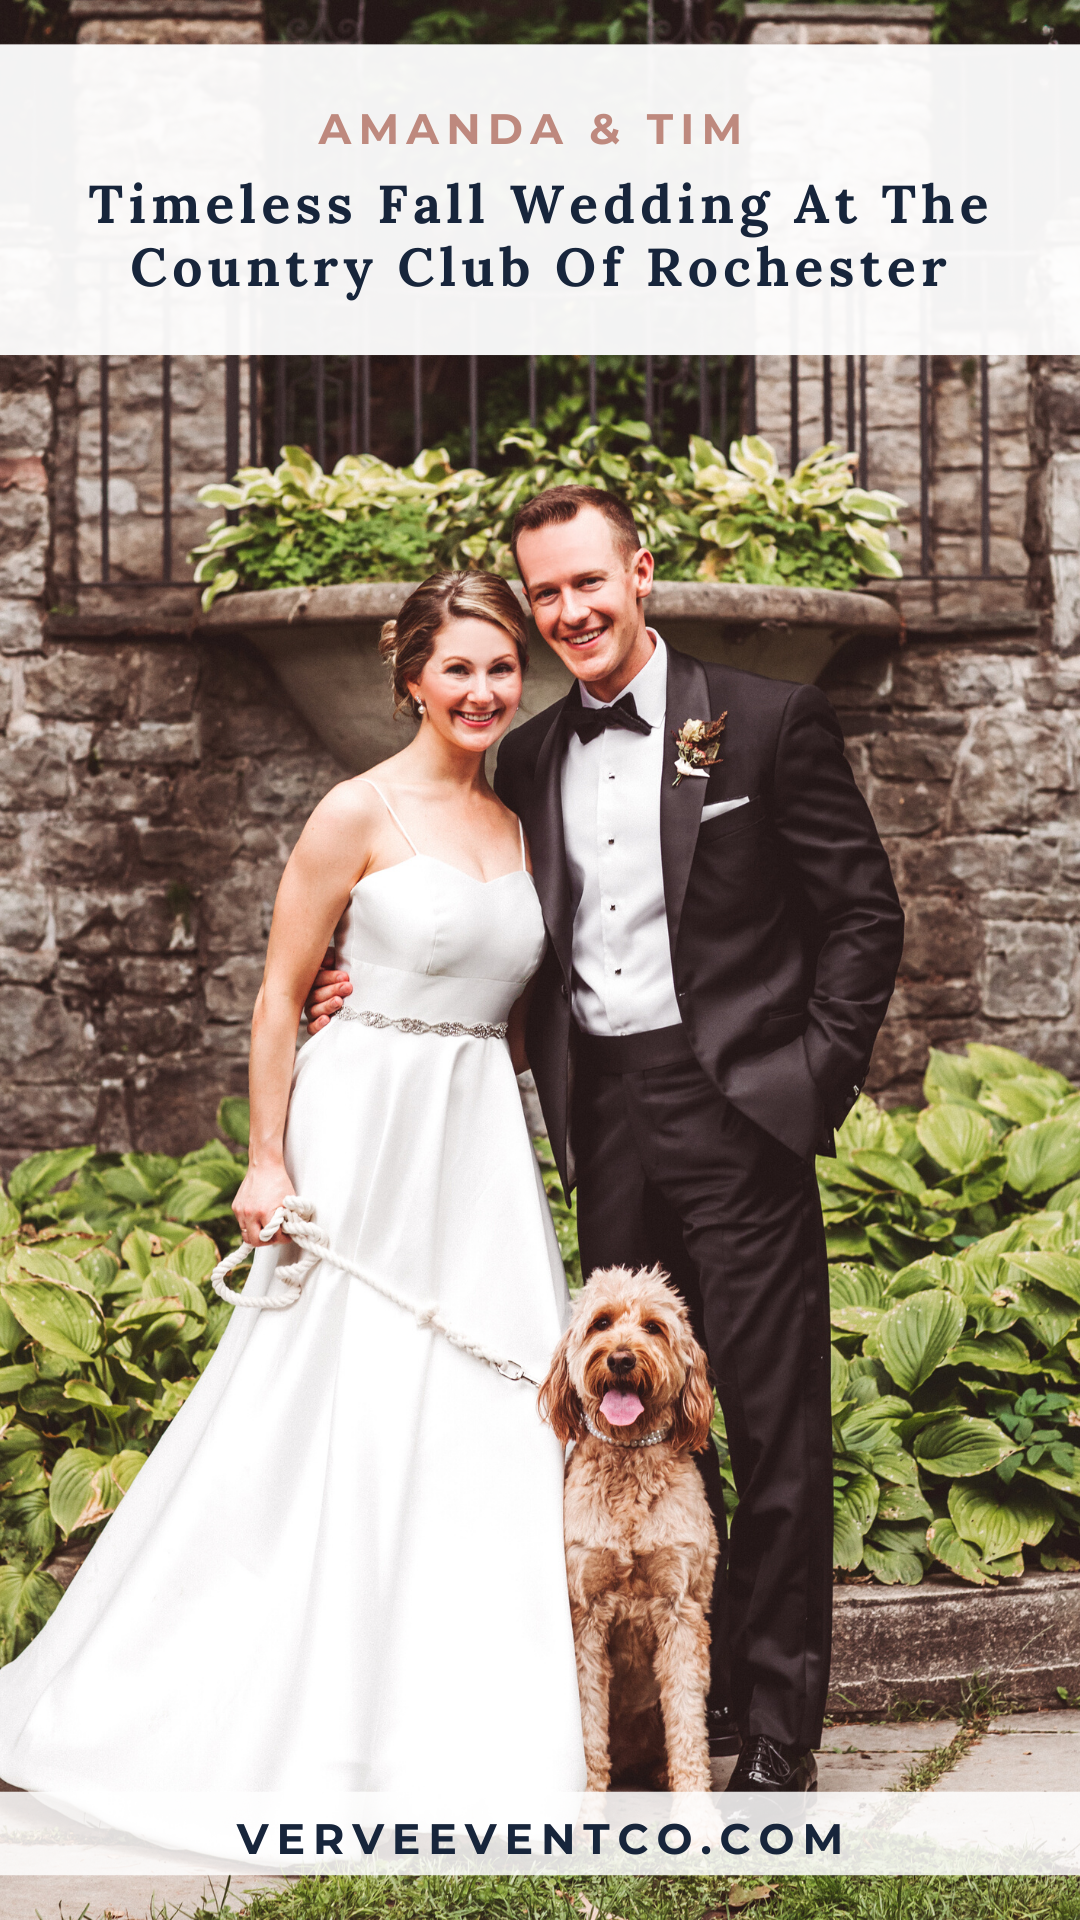 Amanda and Tim’s Timeless Fall Wedding at the Country Club of Rochester